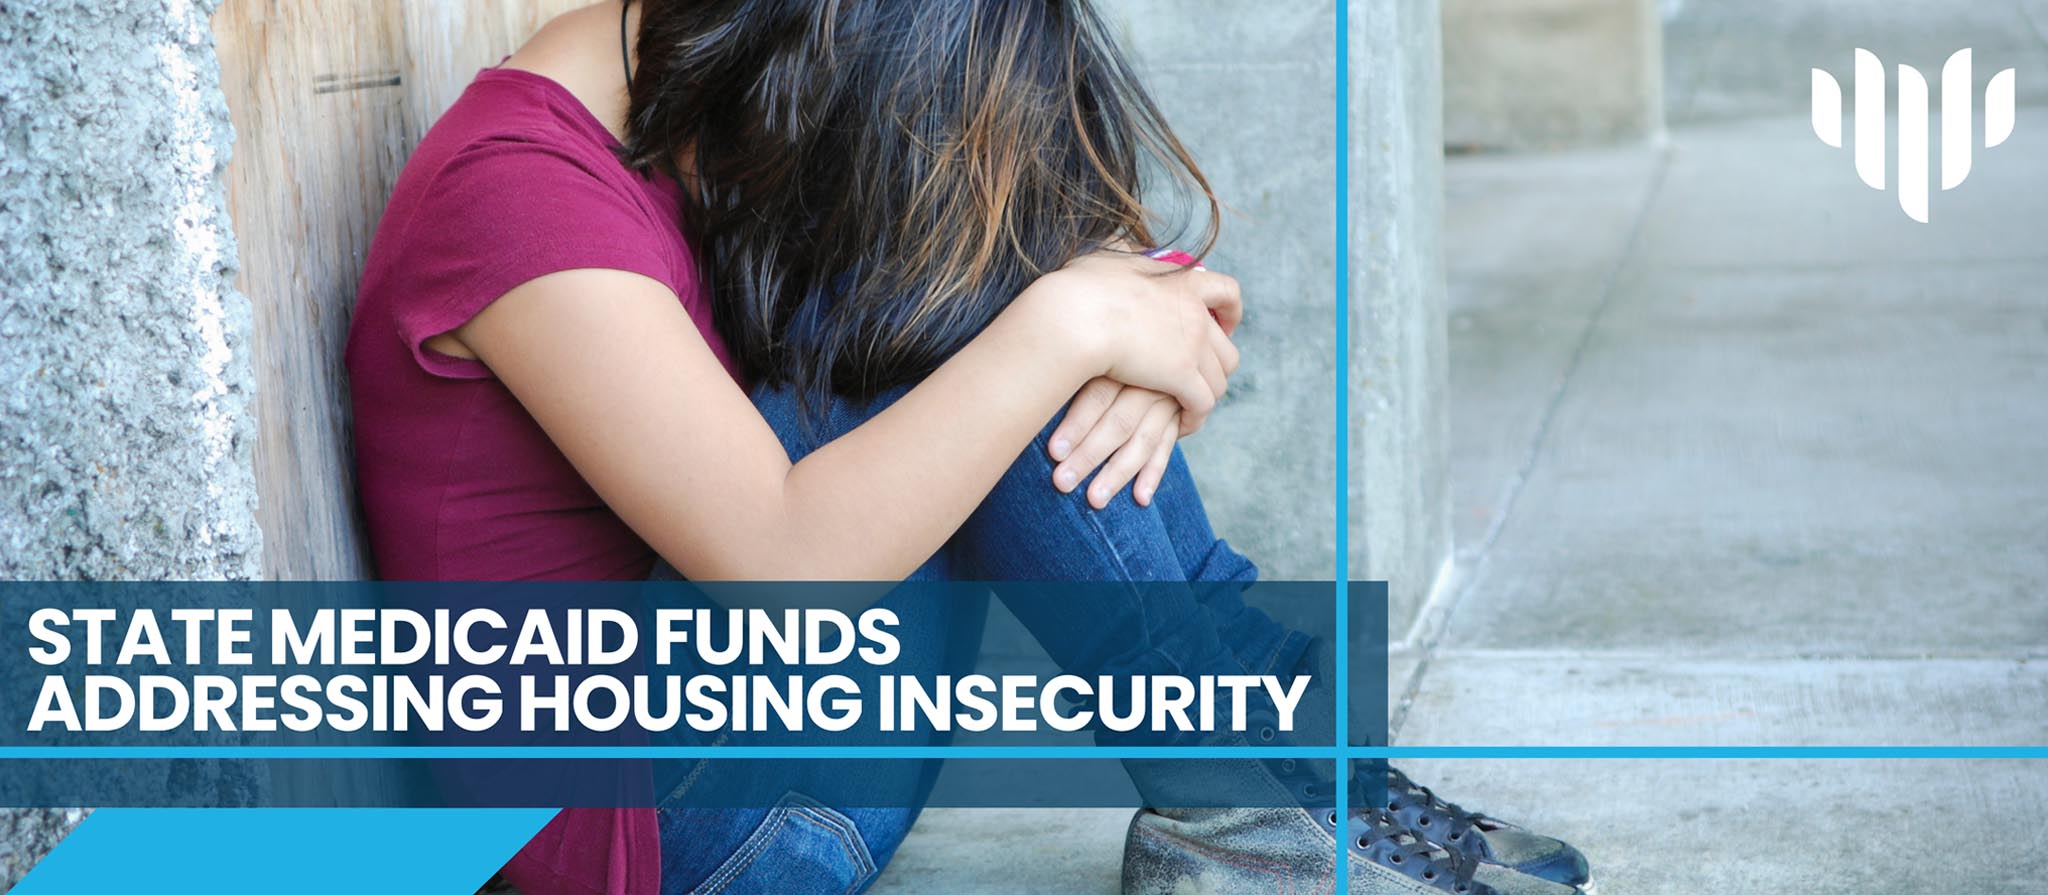 State Medicaid Funds Addressing Housing Insecurity